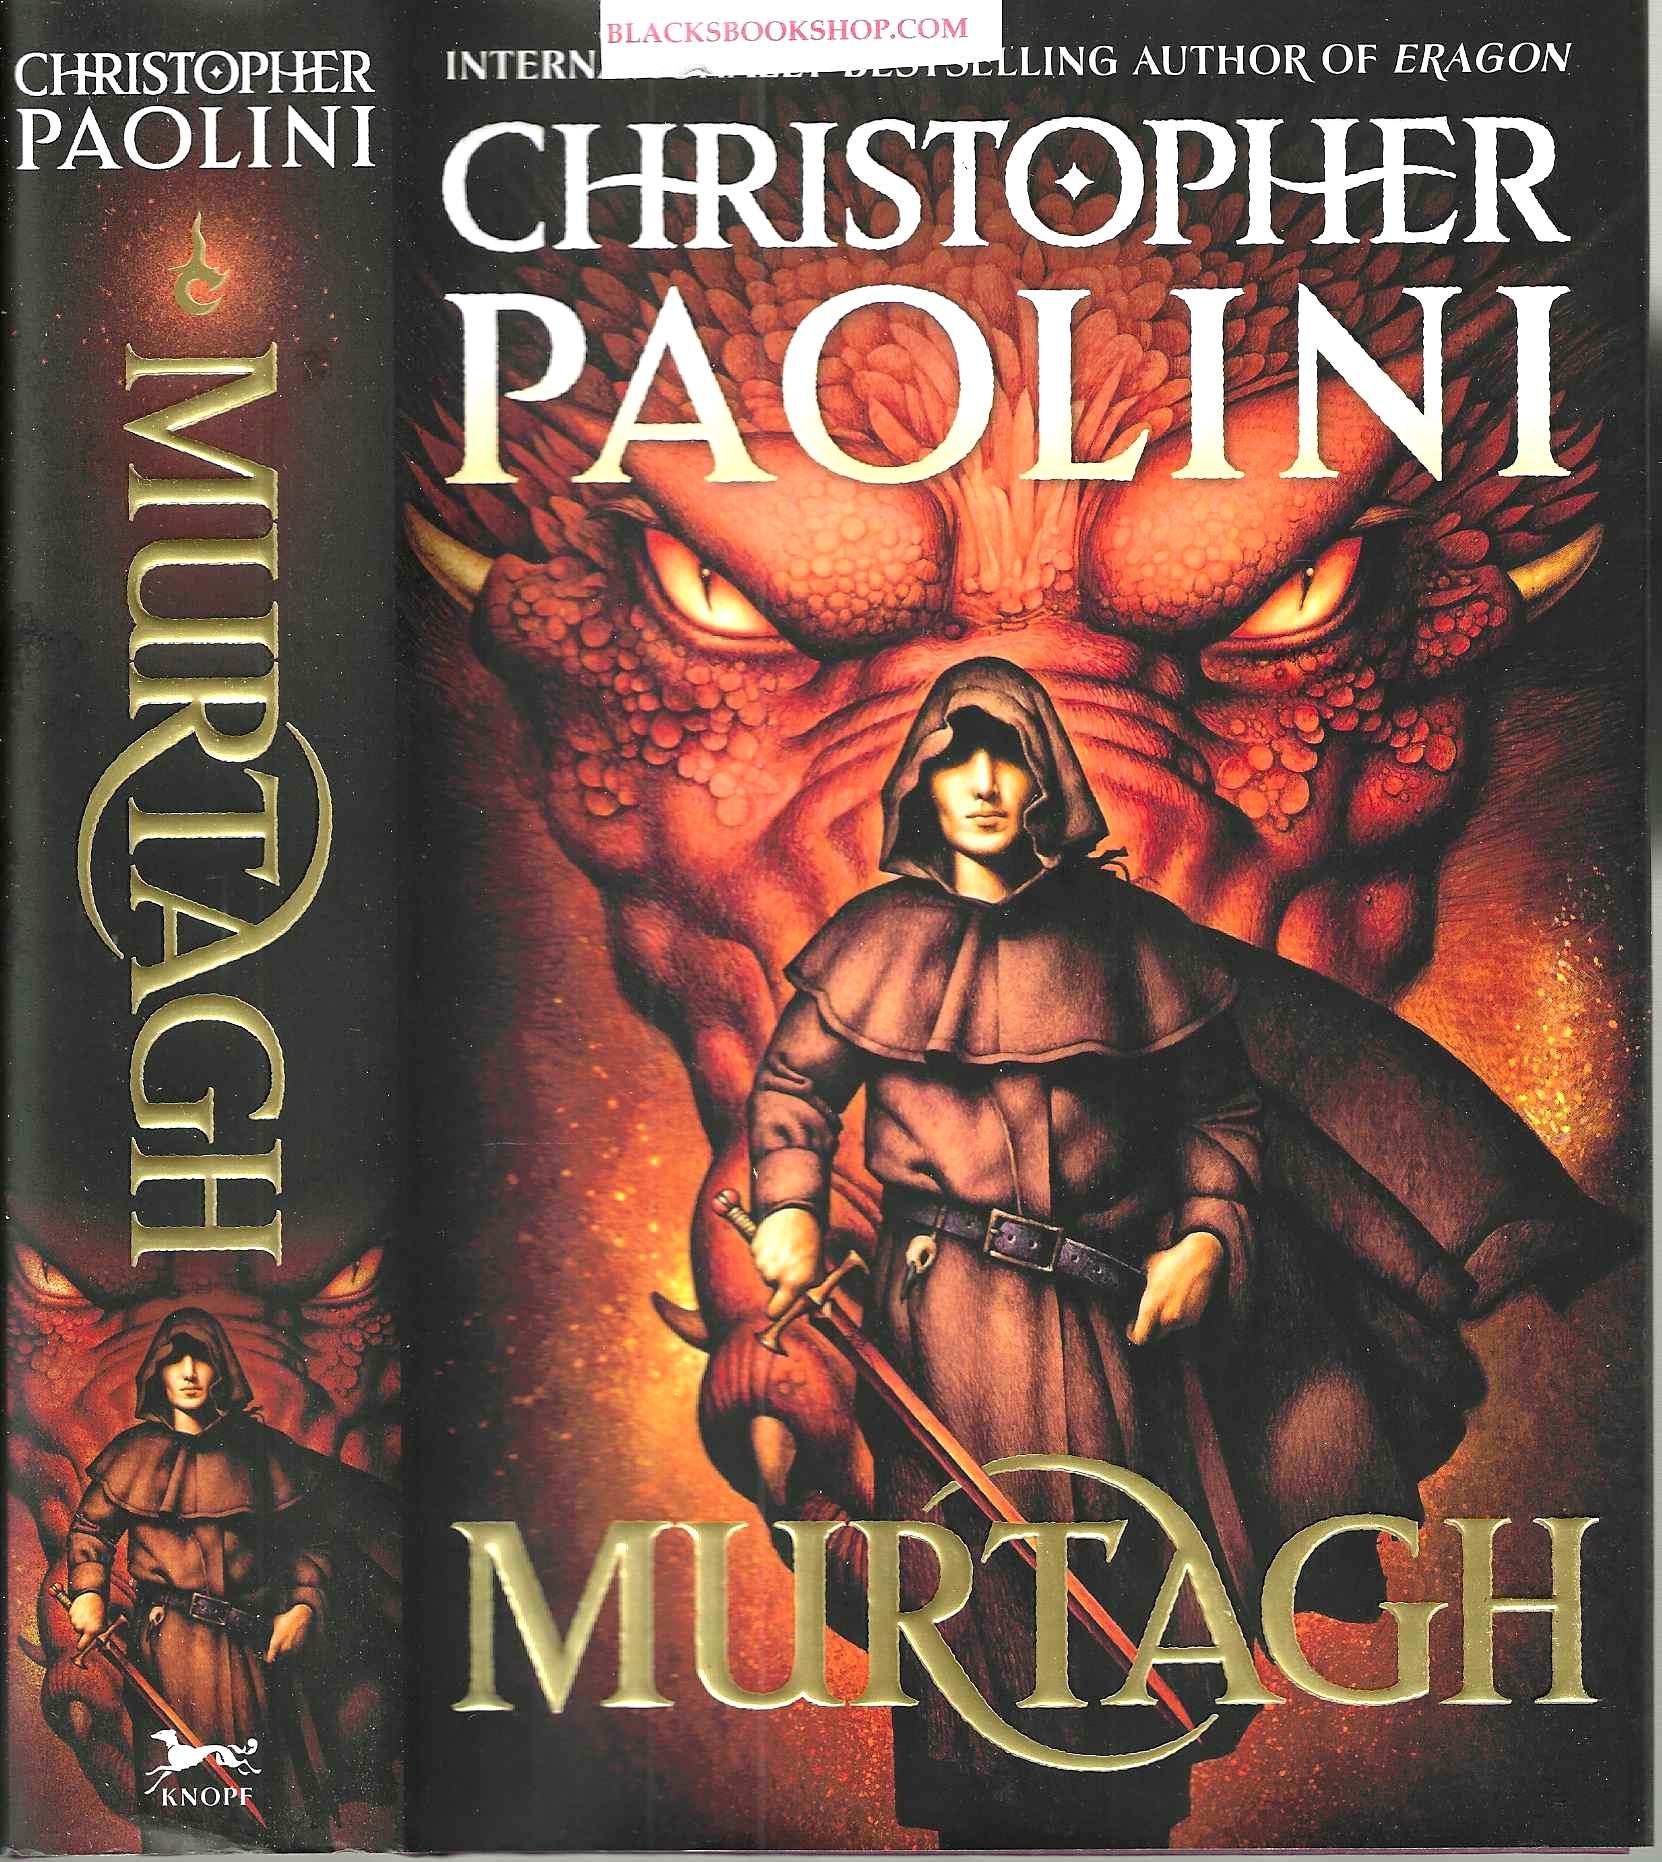 Murtagh: The World of Eragon The Inheritance Cycle #5 by Christopher  Paolini on Black's Bookshop